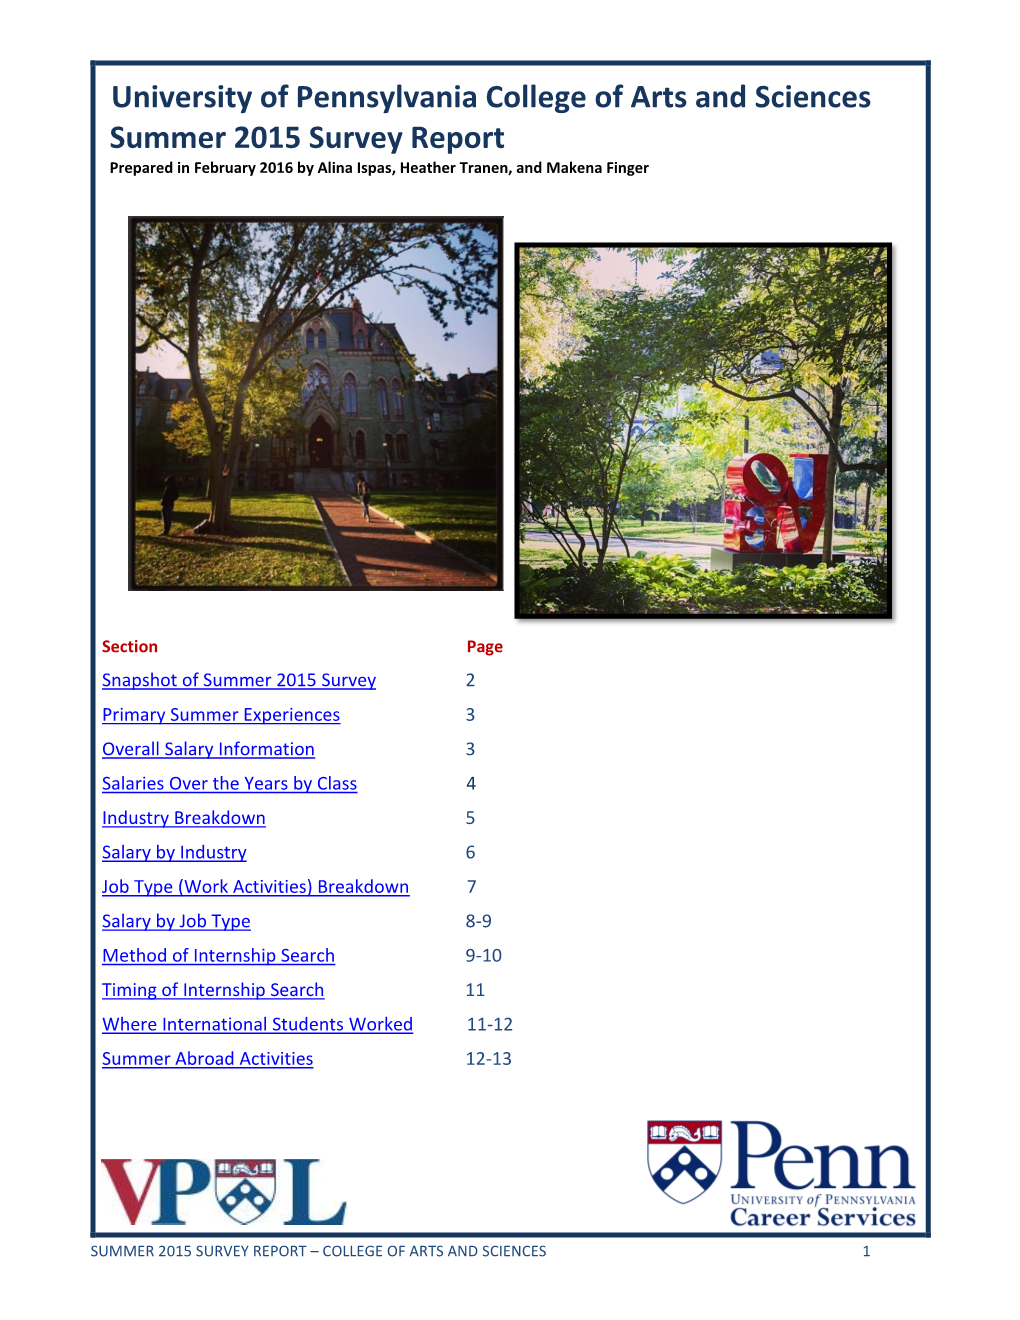 University of Pennsylvania College of Arts and Sciences Summer 2015 Survey Report Prepared in February 2016 by Alina Ispas, Heather Tranen, and Makena Finger